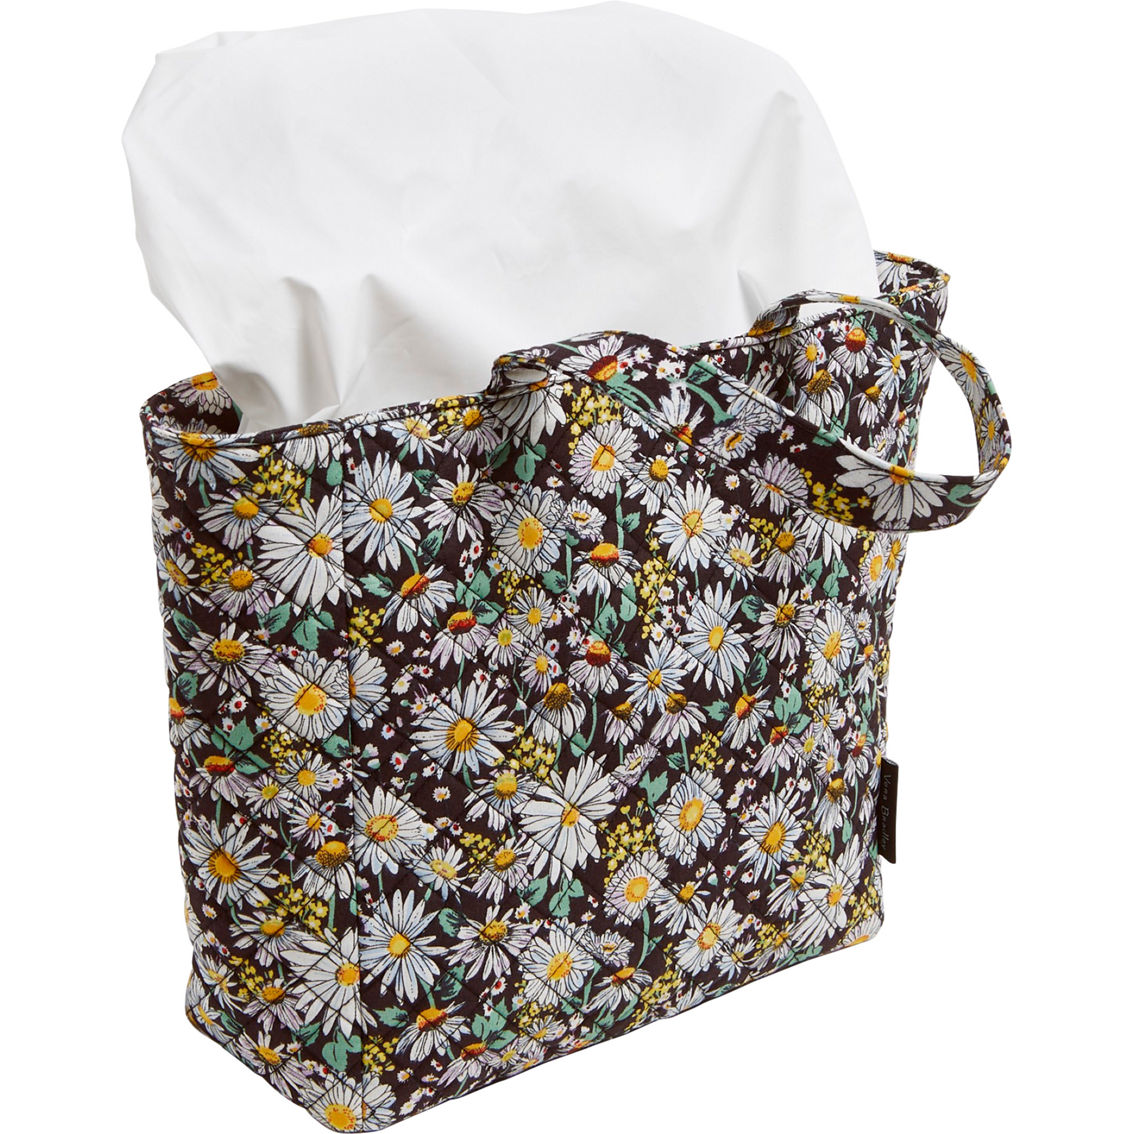 Vera Bradley Lunch Tote, Daisies White - Image 3 of 3